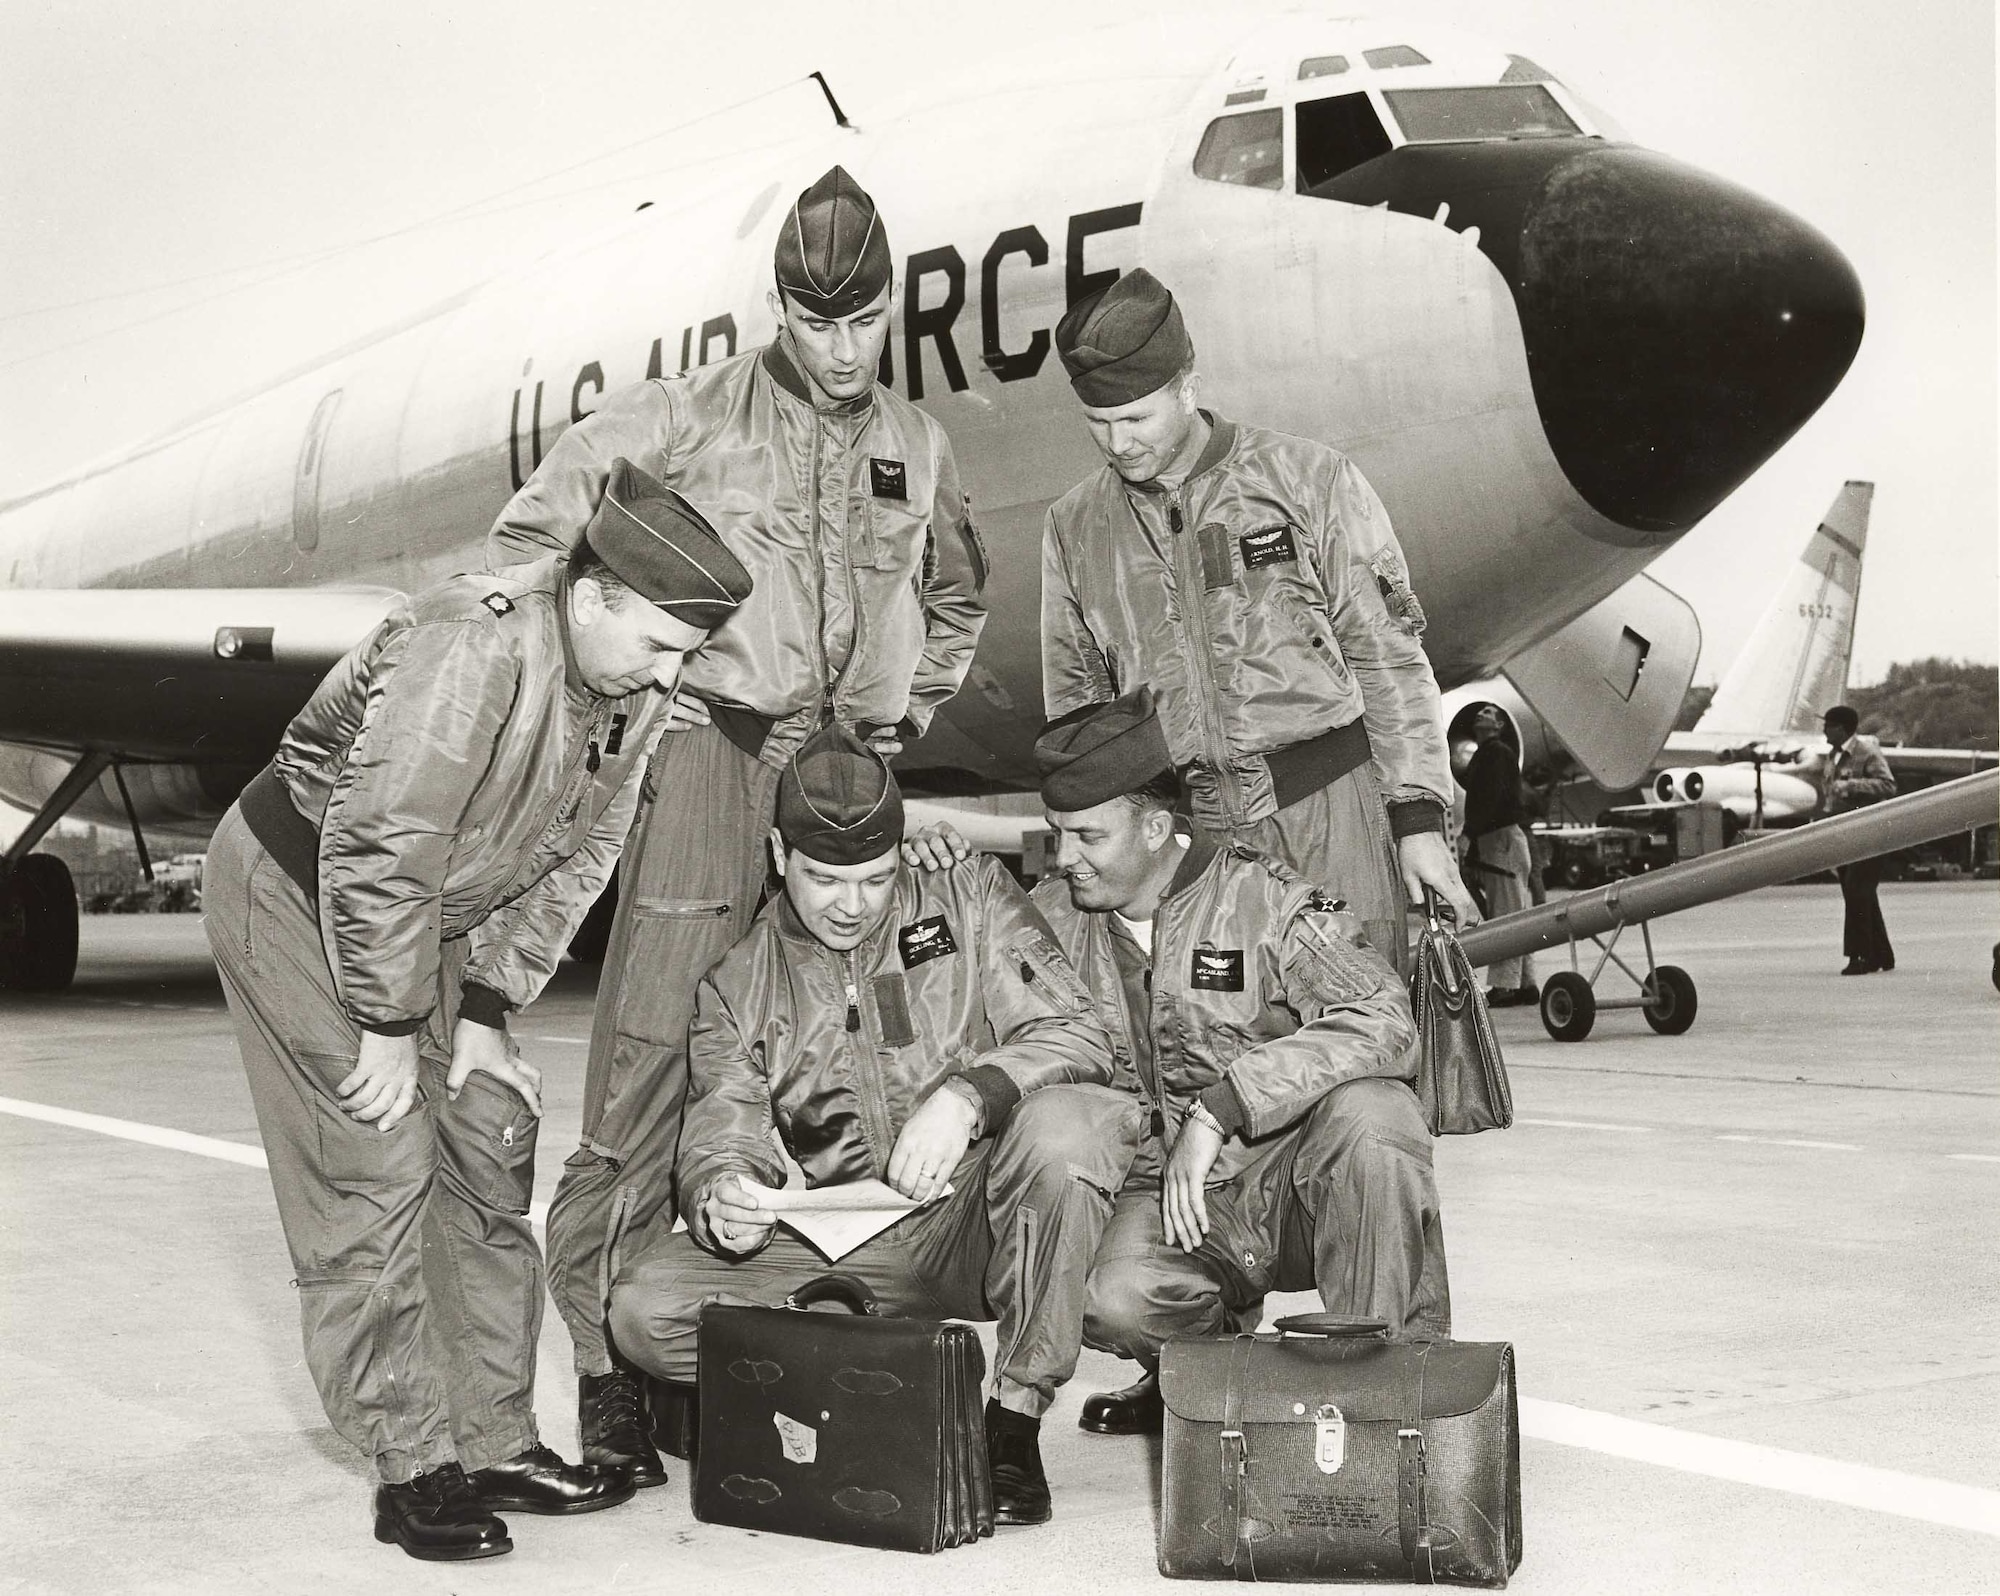 Retired Chief Master Sgt. Bobby McCasland, bottom right, a former crew chief, talks with crewmembers of the C-135 Stratolifter, tail number 55-3126, that was used to transport dignitaries under the command of then-Vice Chief of Staff of the Air Force Gen. Curtis E. LeMay from 1957-1965. McCasland, who was part of the crew that delivered the Air Force’s first KC-135 Stratotanker in June 1957, attended the KC-135’s 60th anniversary at McConnell Air Force Base, Aug. 31, 2016. (Courtesy photo)